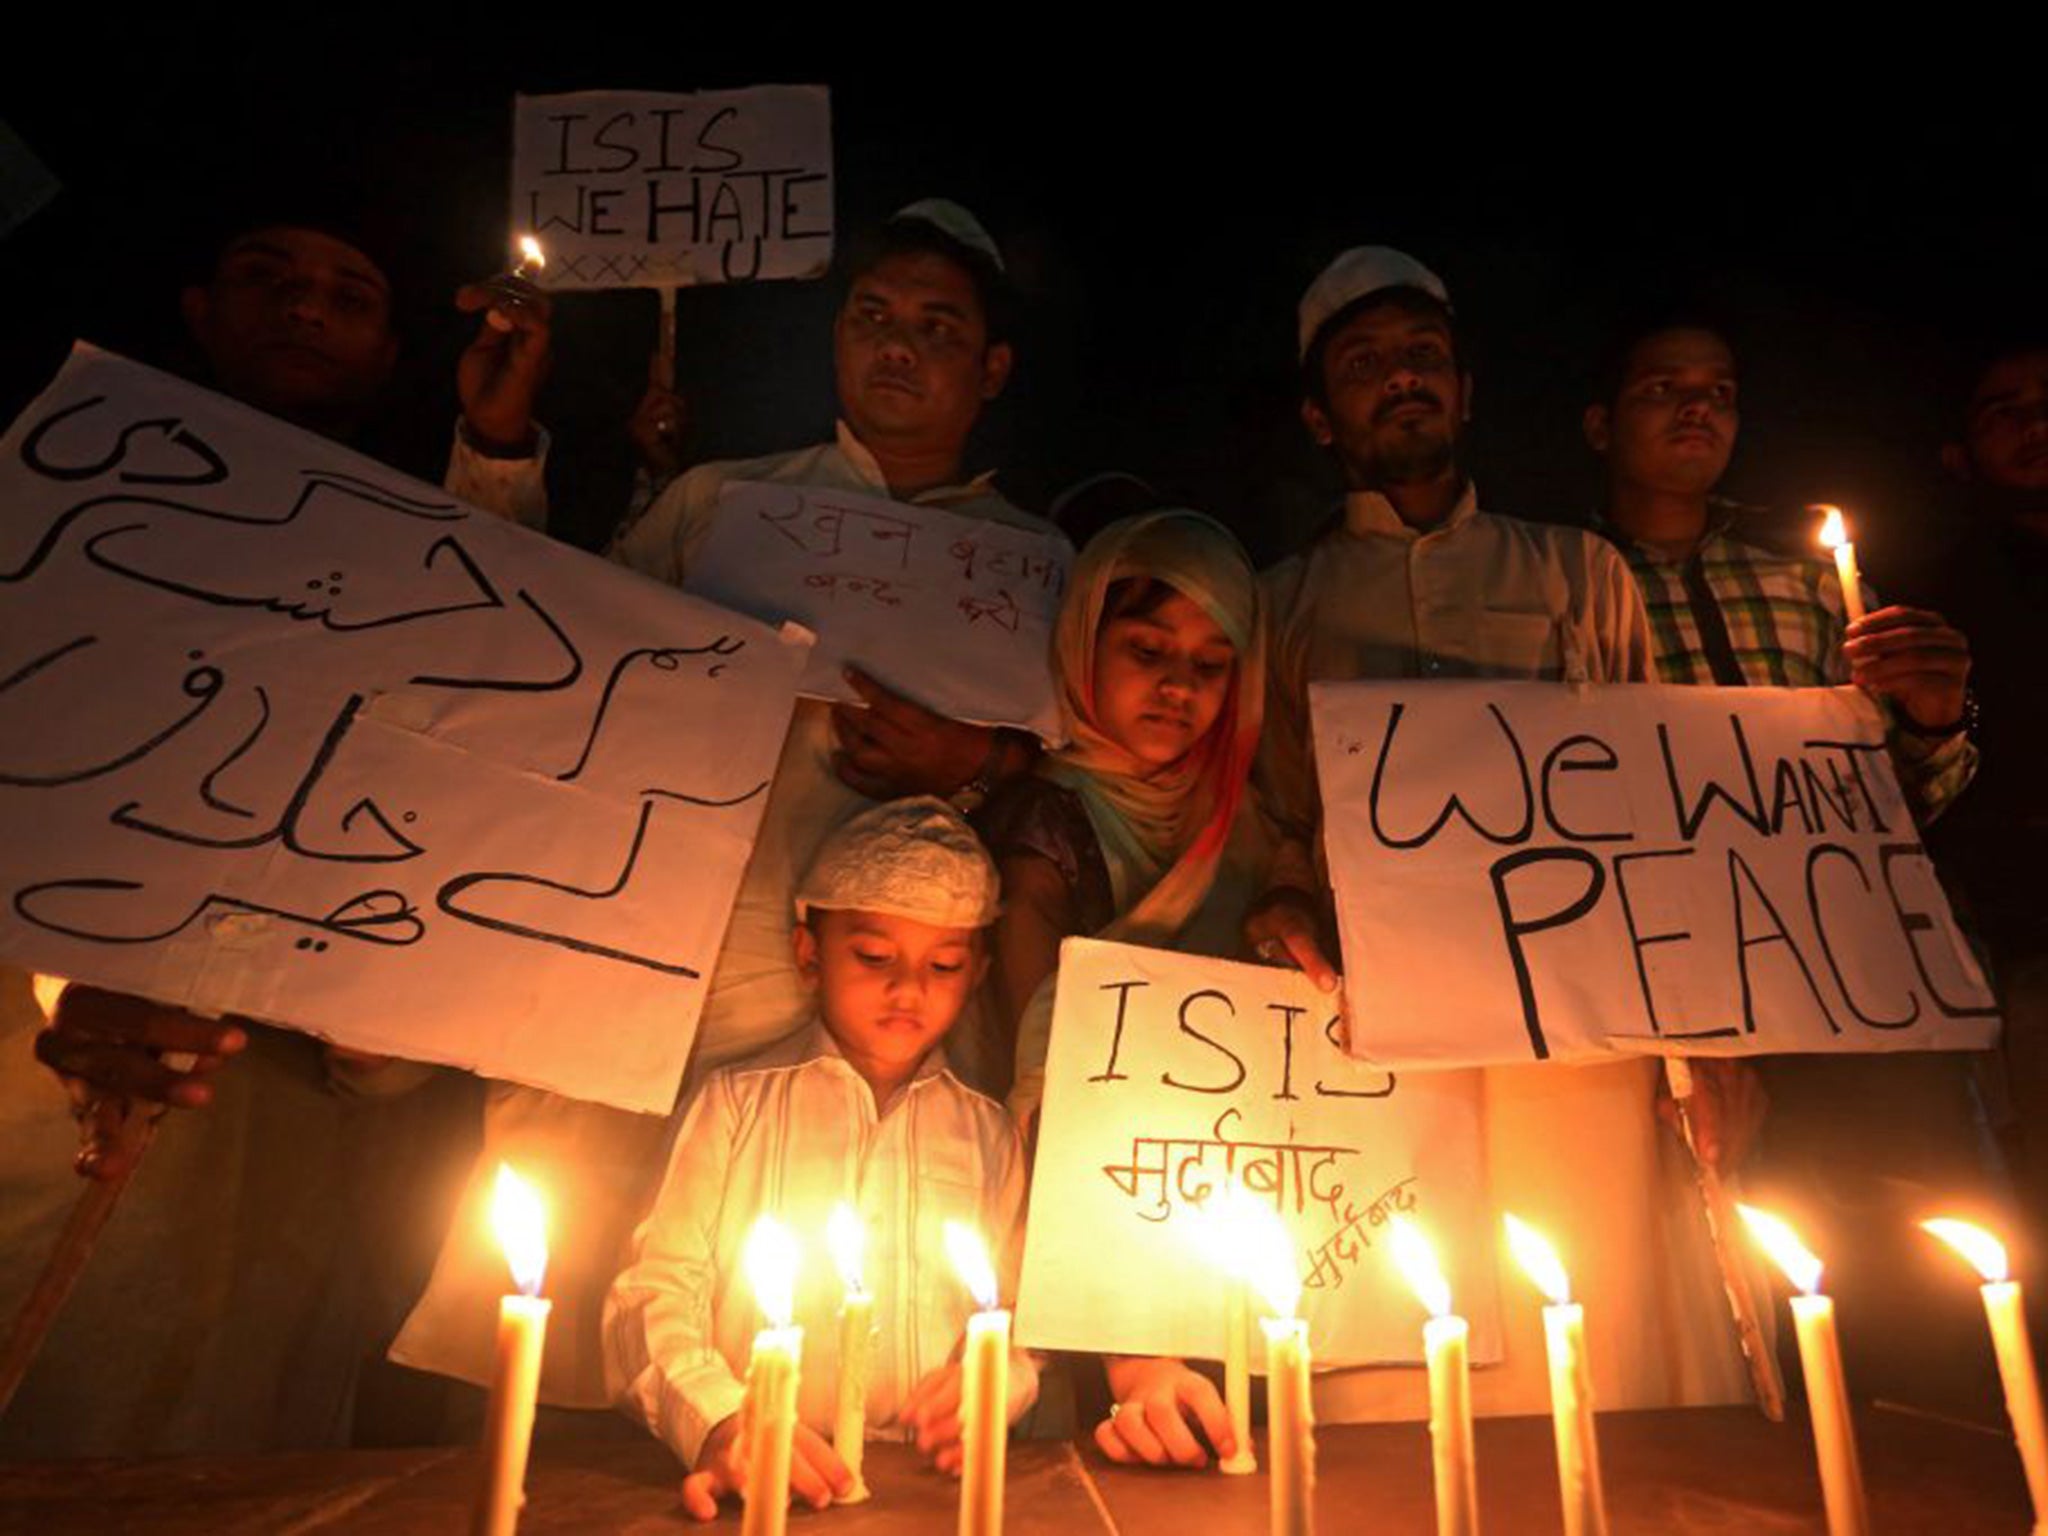 Muslims light candles for peace after Paris attacks